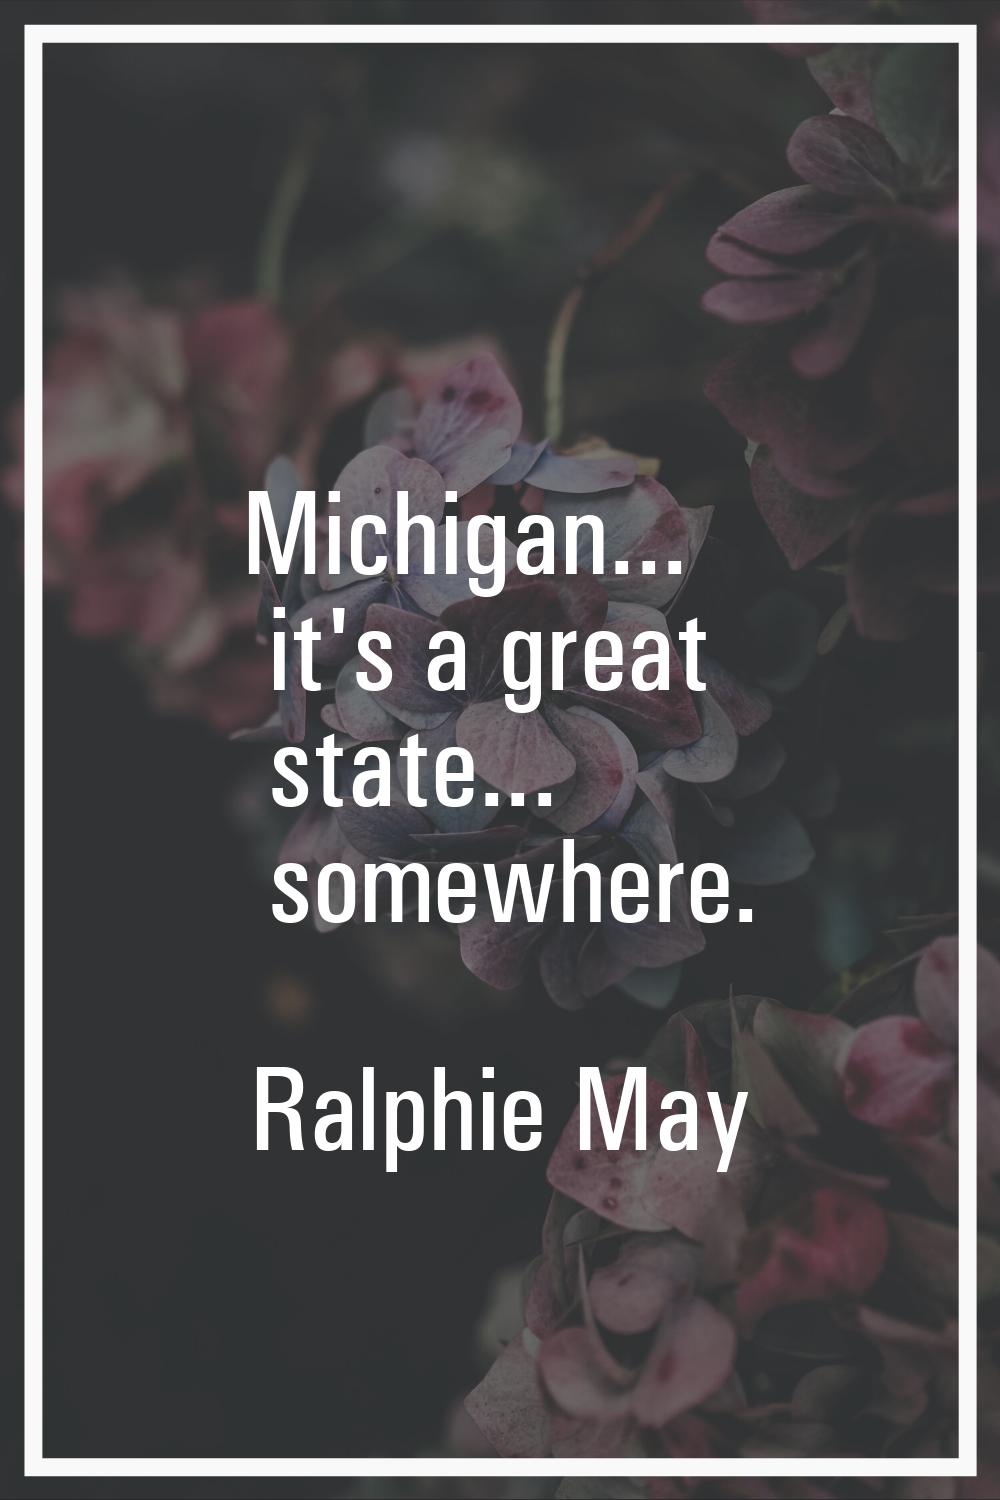 Michigan... it's a great state... somewhere.